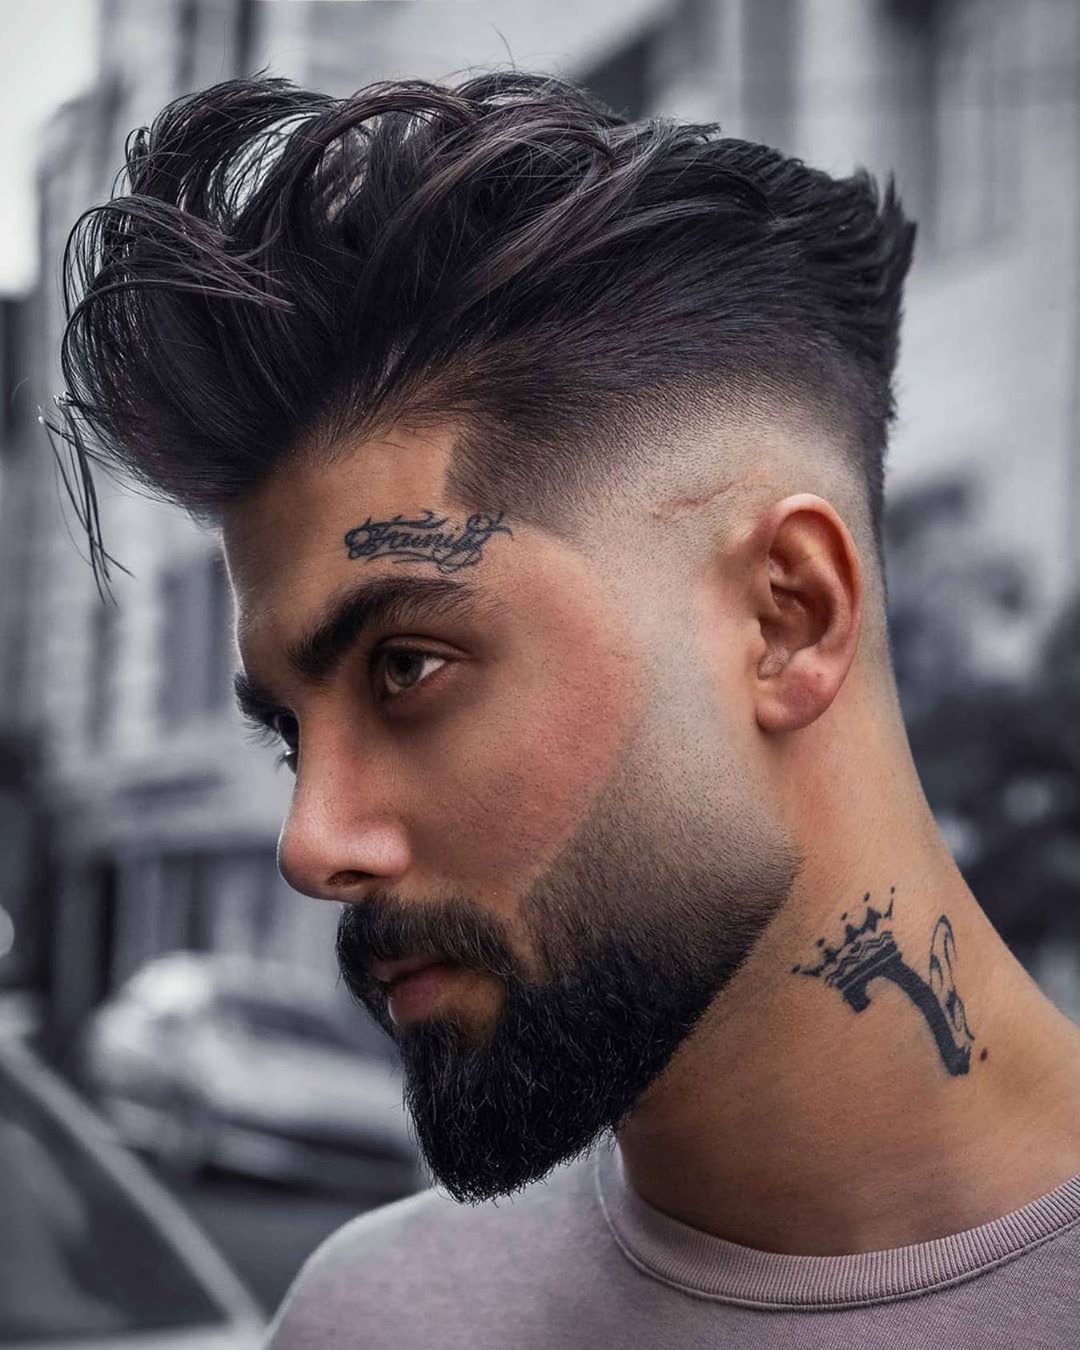 62 Simple New Mens Hairstyle Images Download for Oval Face